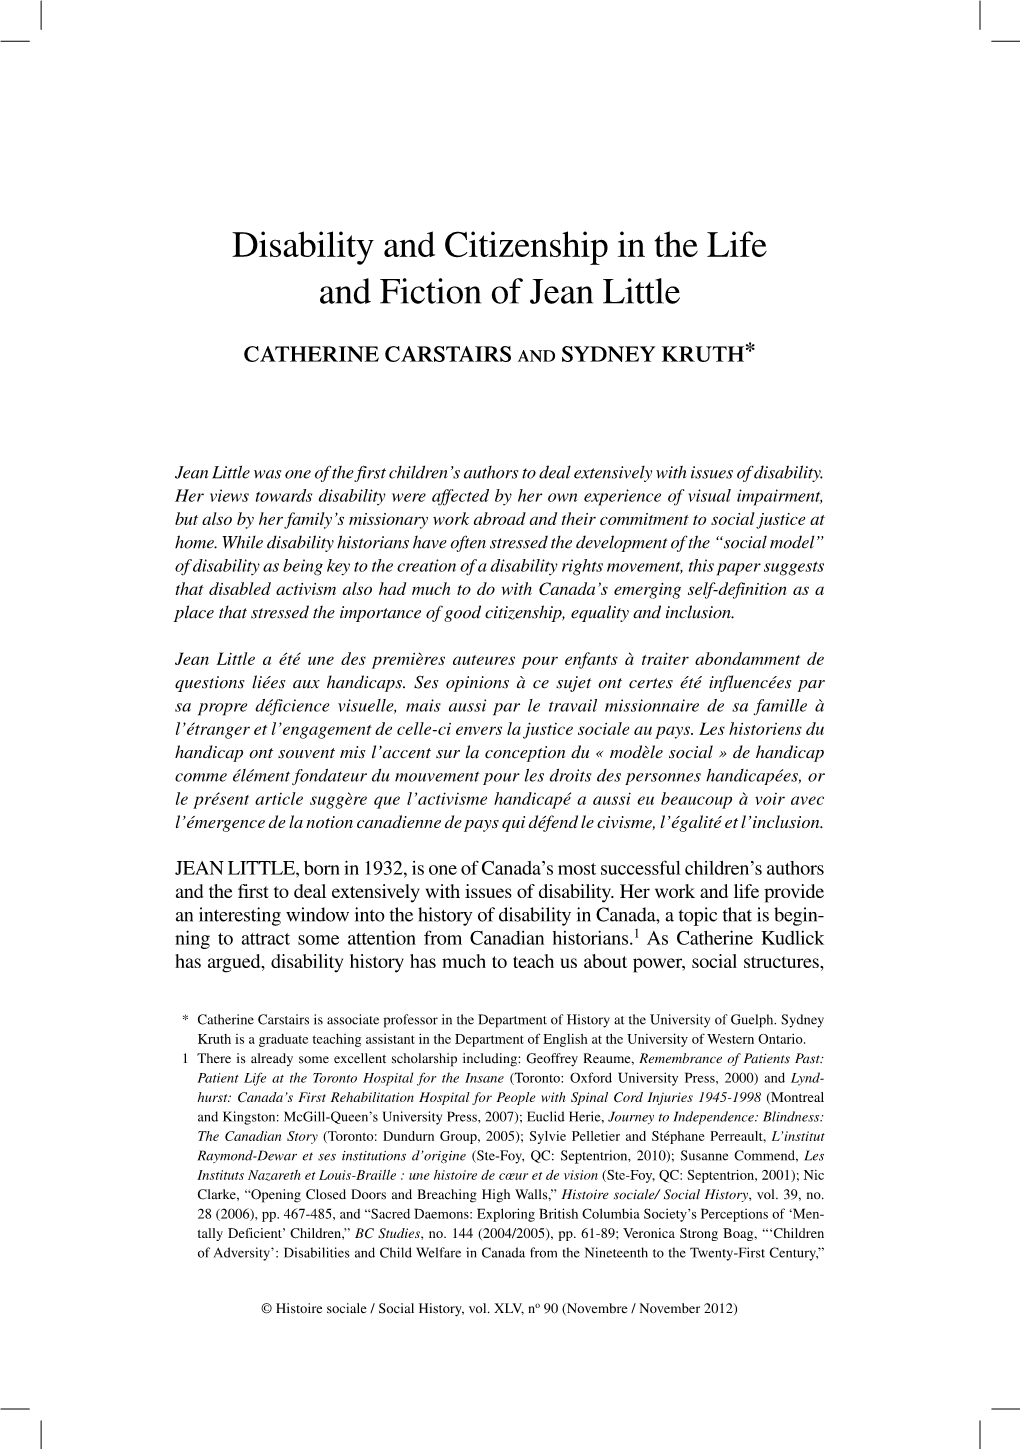 Disability and Citizenship in the Life and Fiction of Jean Little